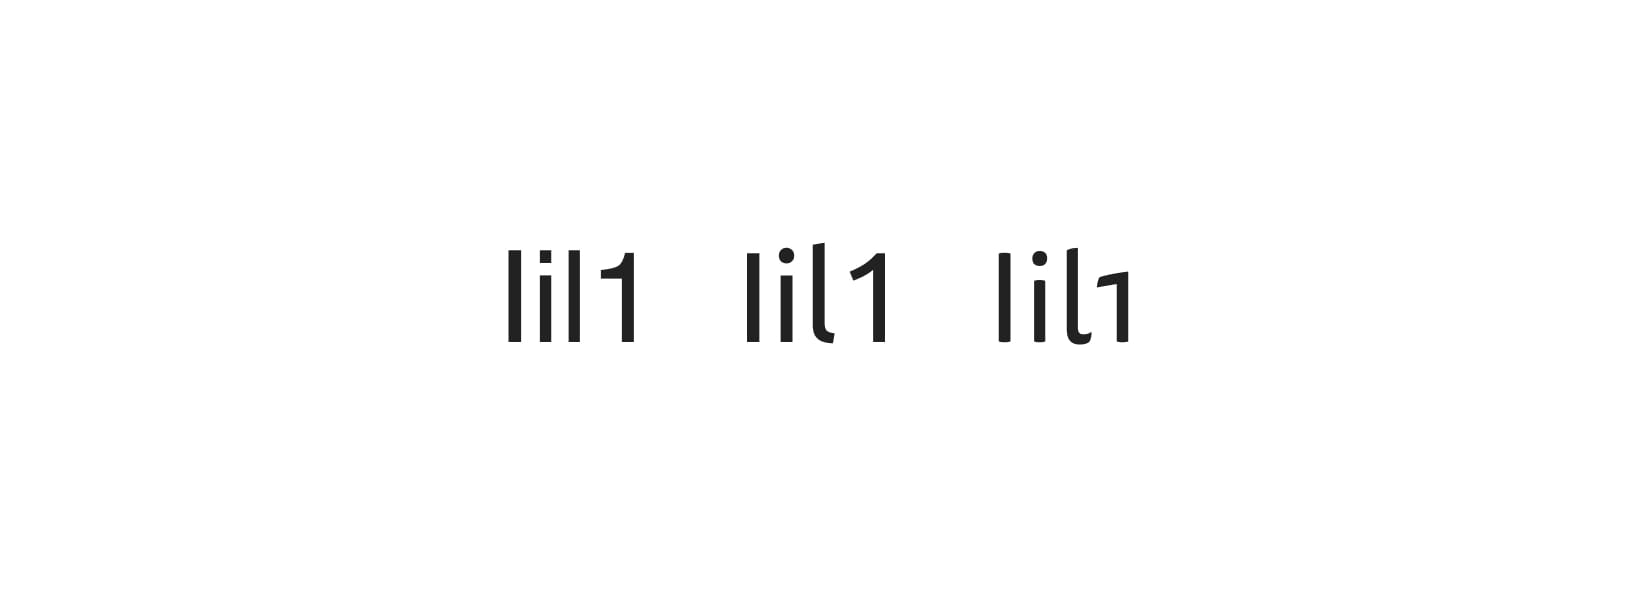 <strong>FIG 7</strong>: Left to right, Helvetica, Ubuntu, Tisa Sans Pro.